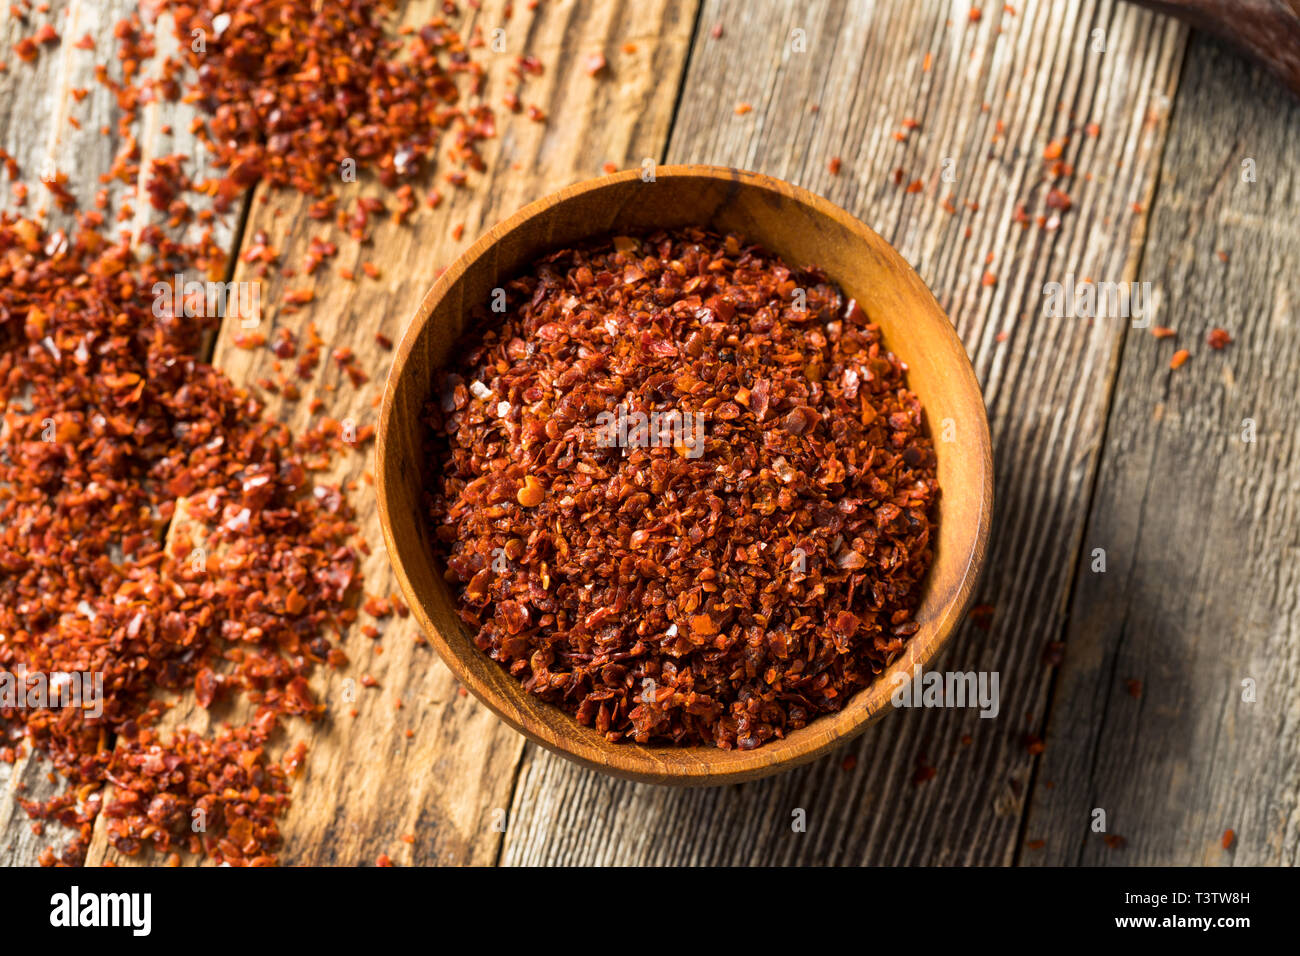 Spicy Organic Red Aleppo Pepper in a Bowl Stock Photo